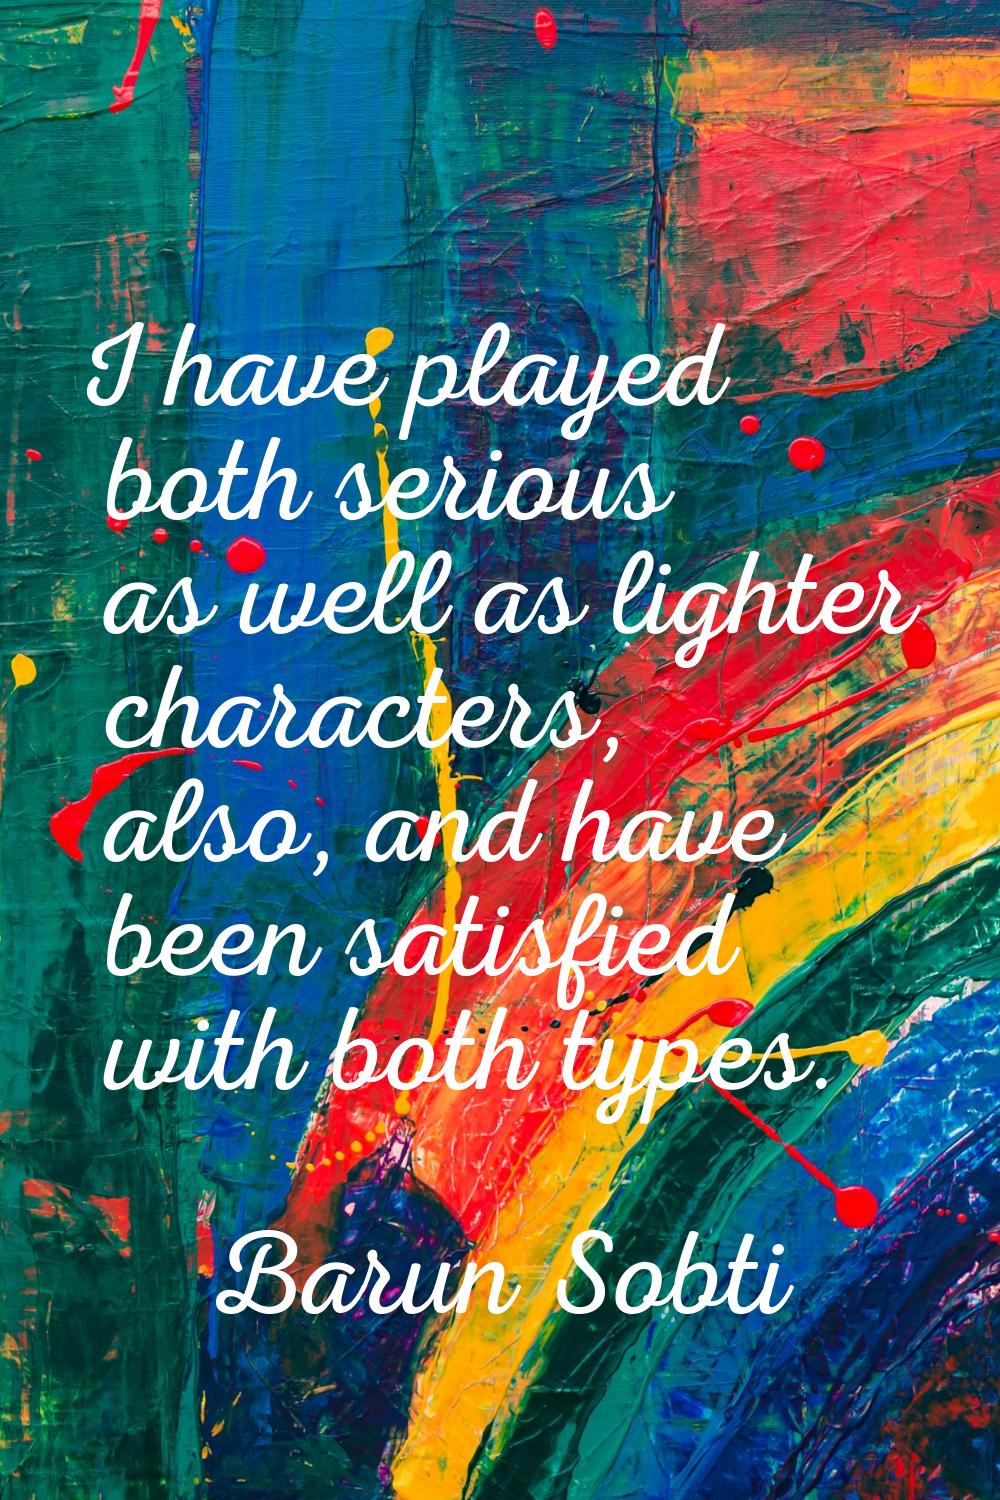 I have played both serious as well as lighter characters, also, and have been satisfied with both t